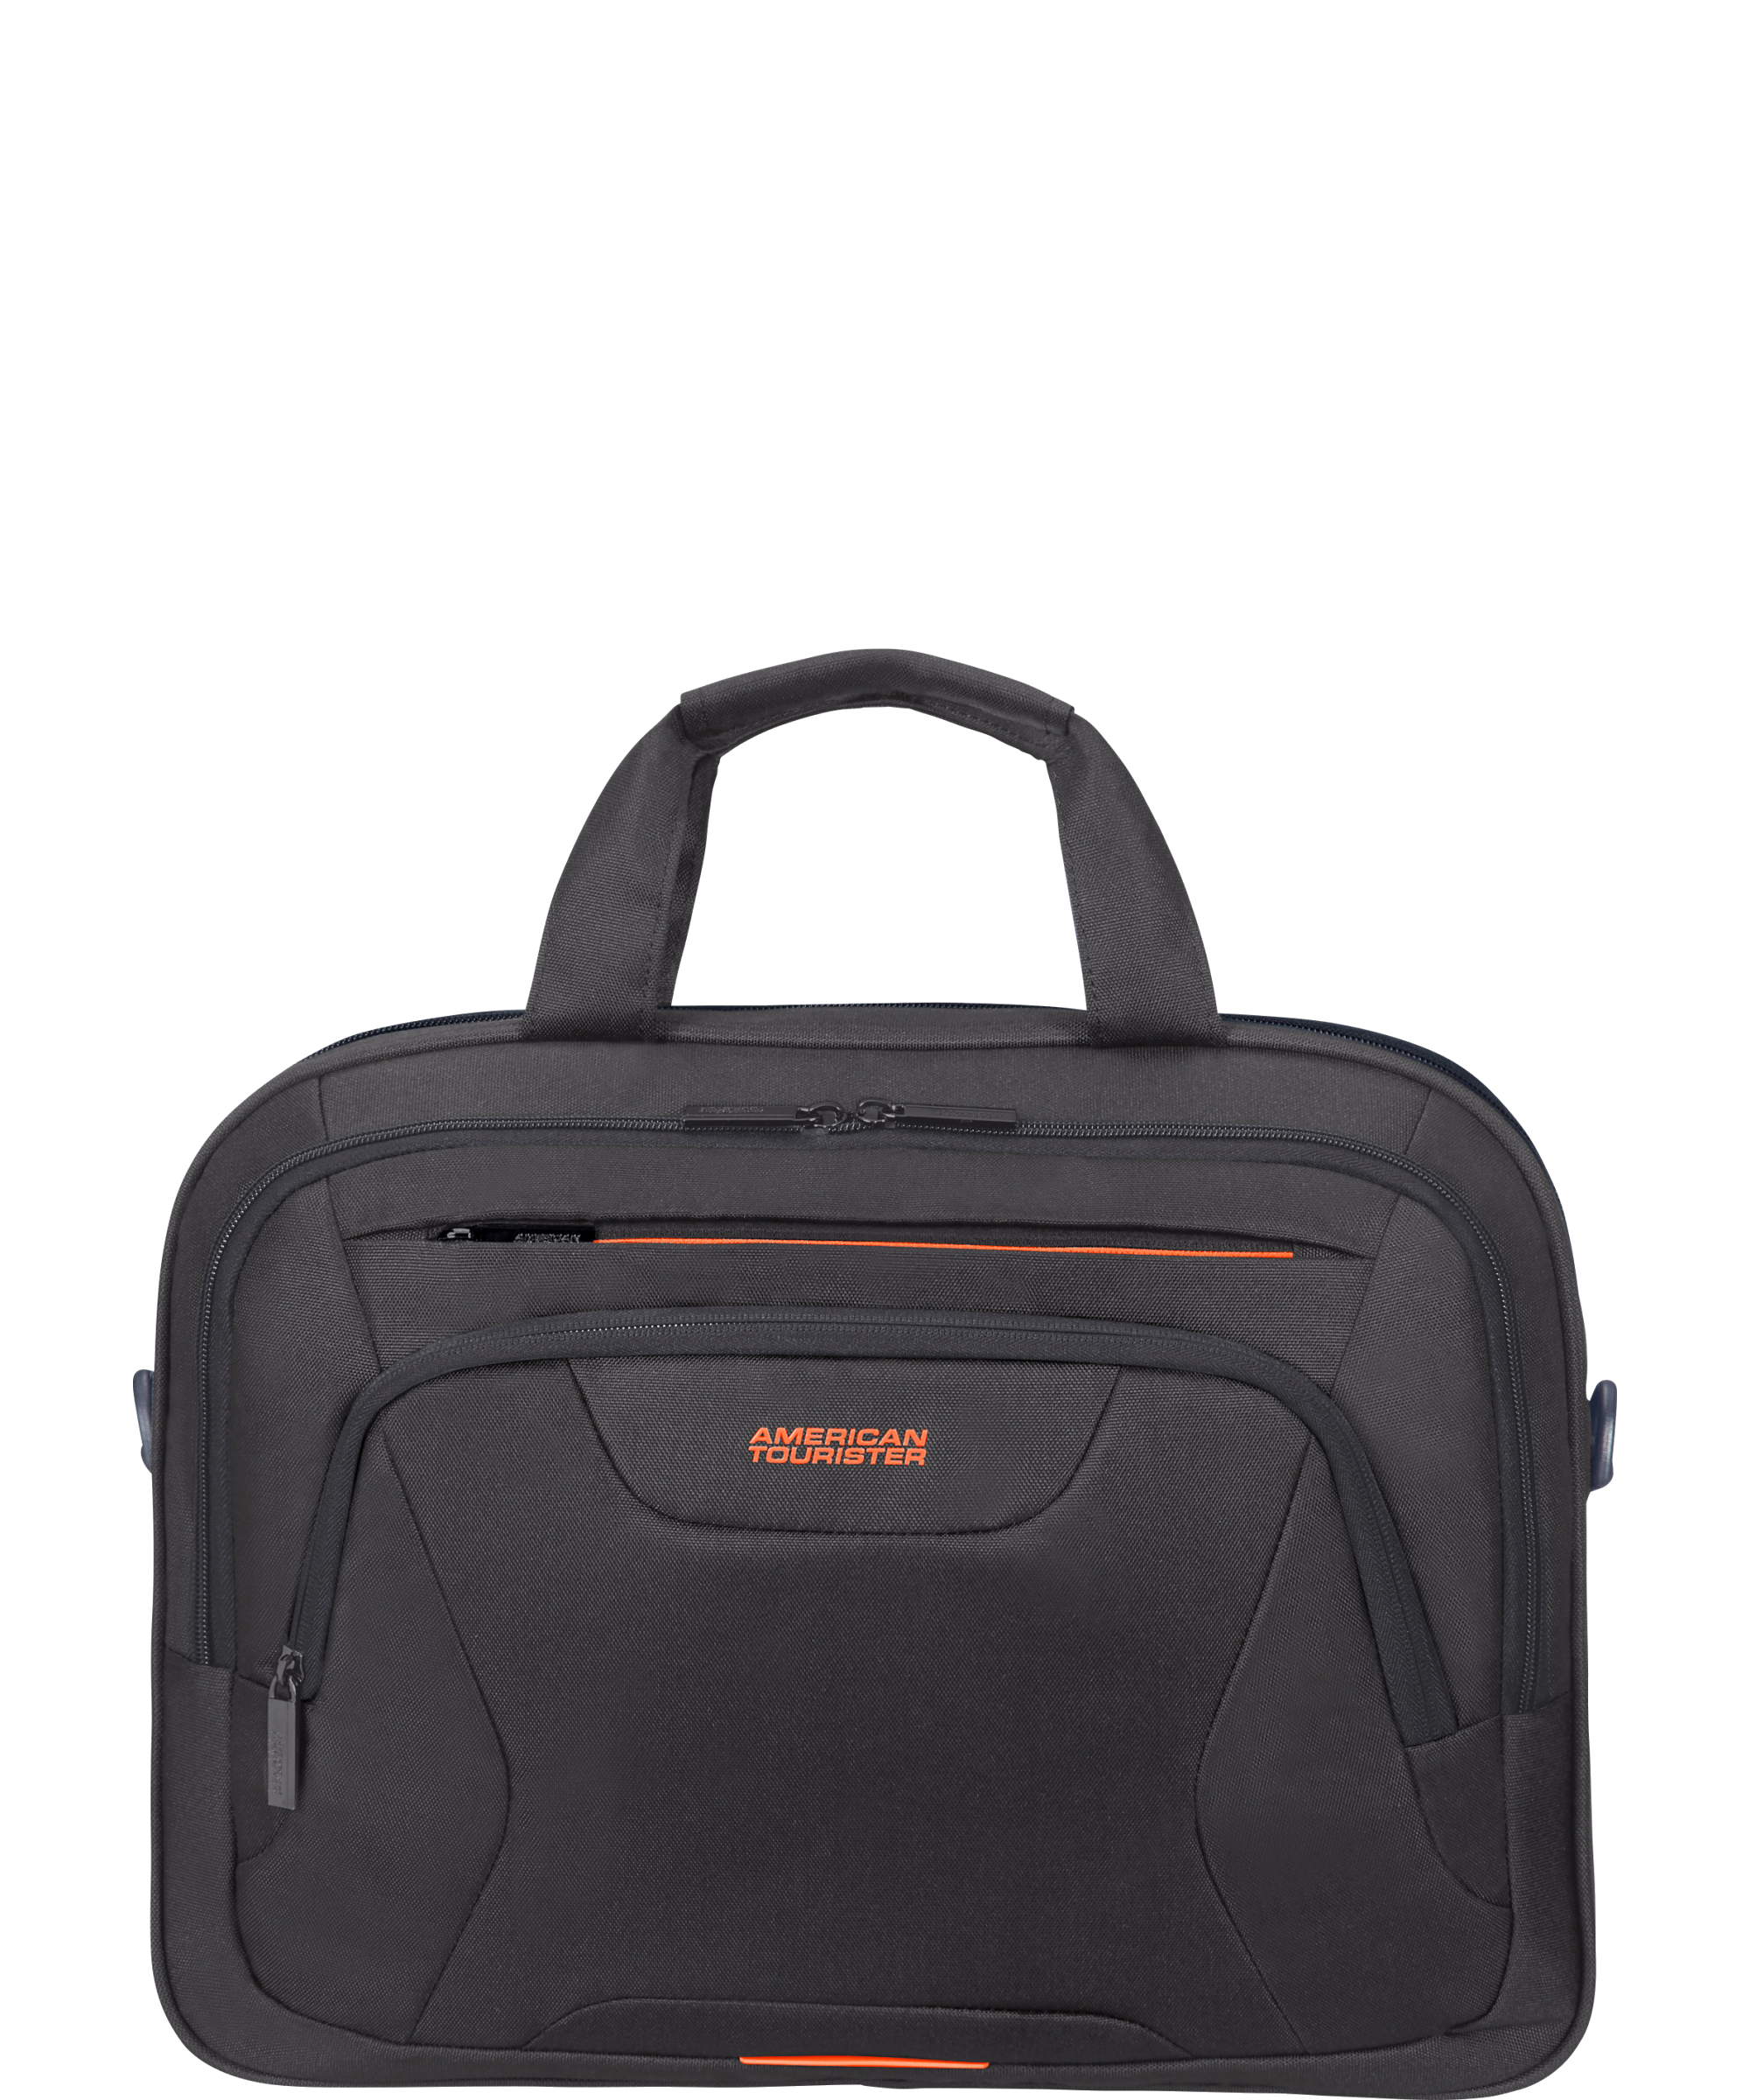 Buy American Tourister 32 Ltrs Black Casual Backpack (AMT FIZZ SCH BAG 02 -  BLACK) with Home Puff Lunch Box at Amazon.in